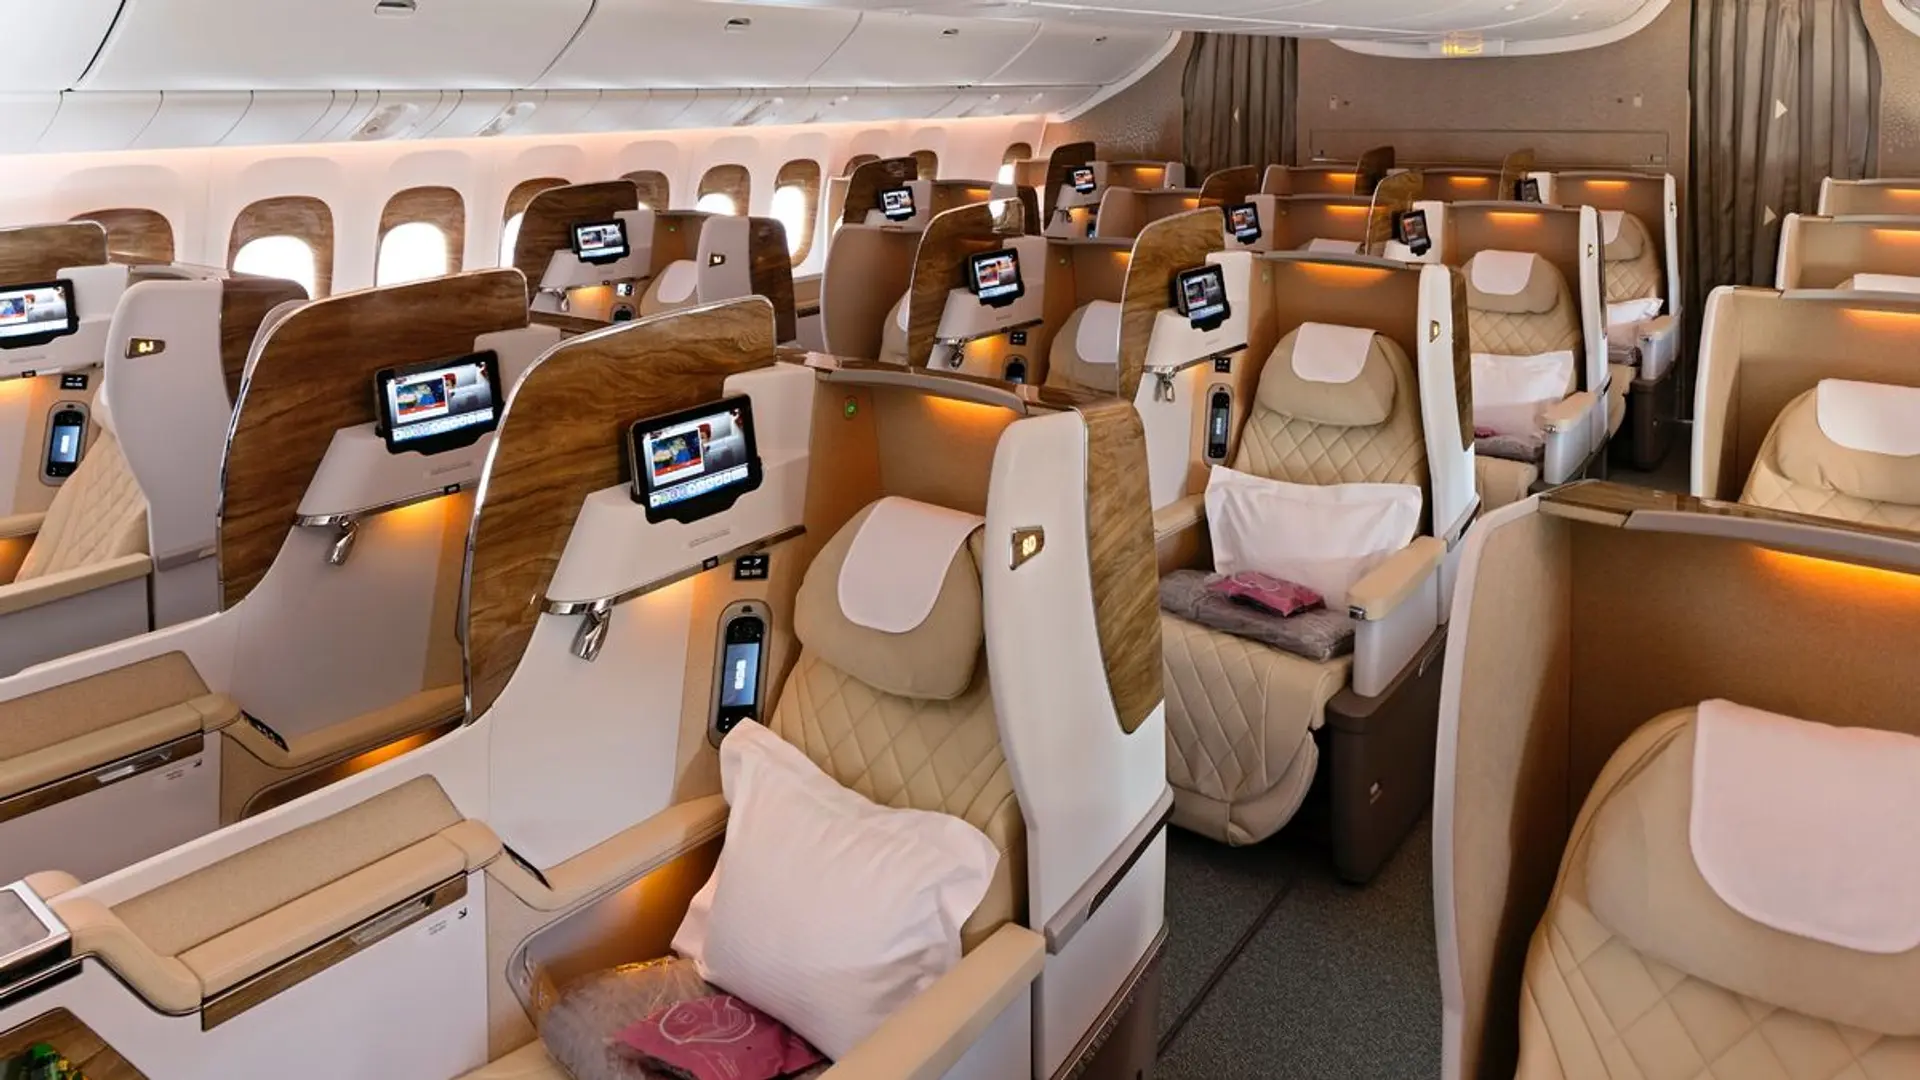 Airlines News - Emirates signals the demise of the "middle seat" in Business Class